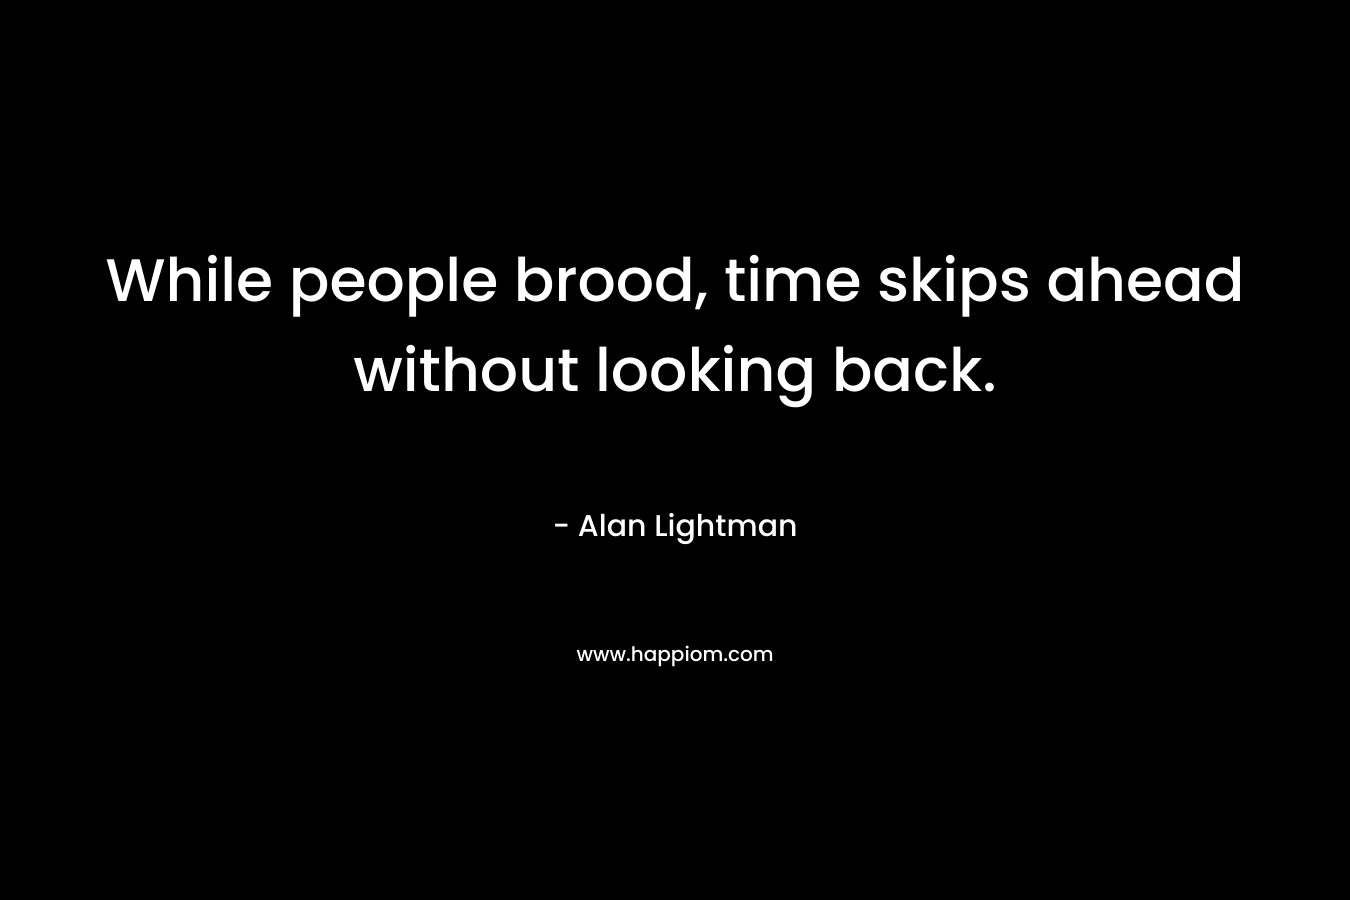 While people brood, time skips ahead without looking back.